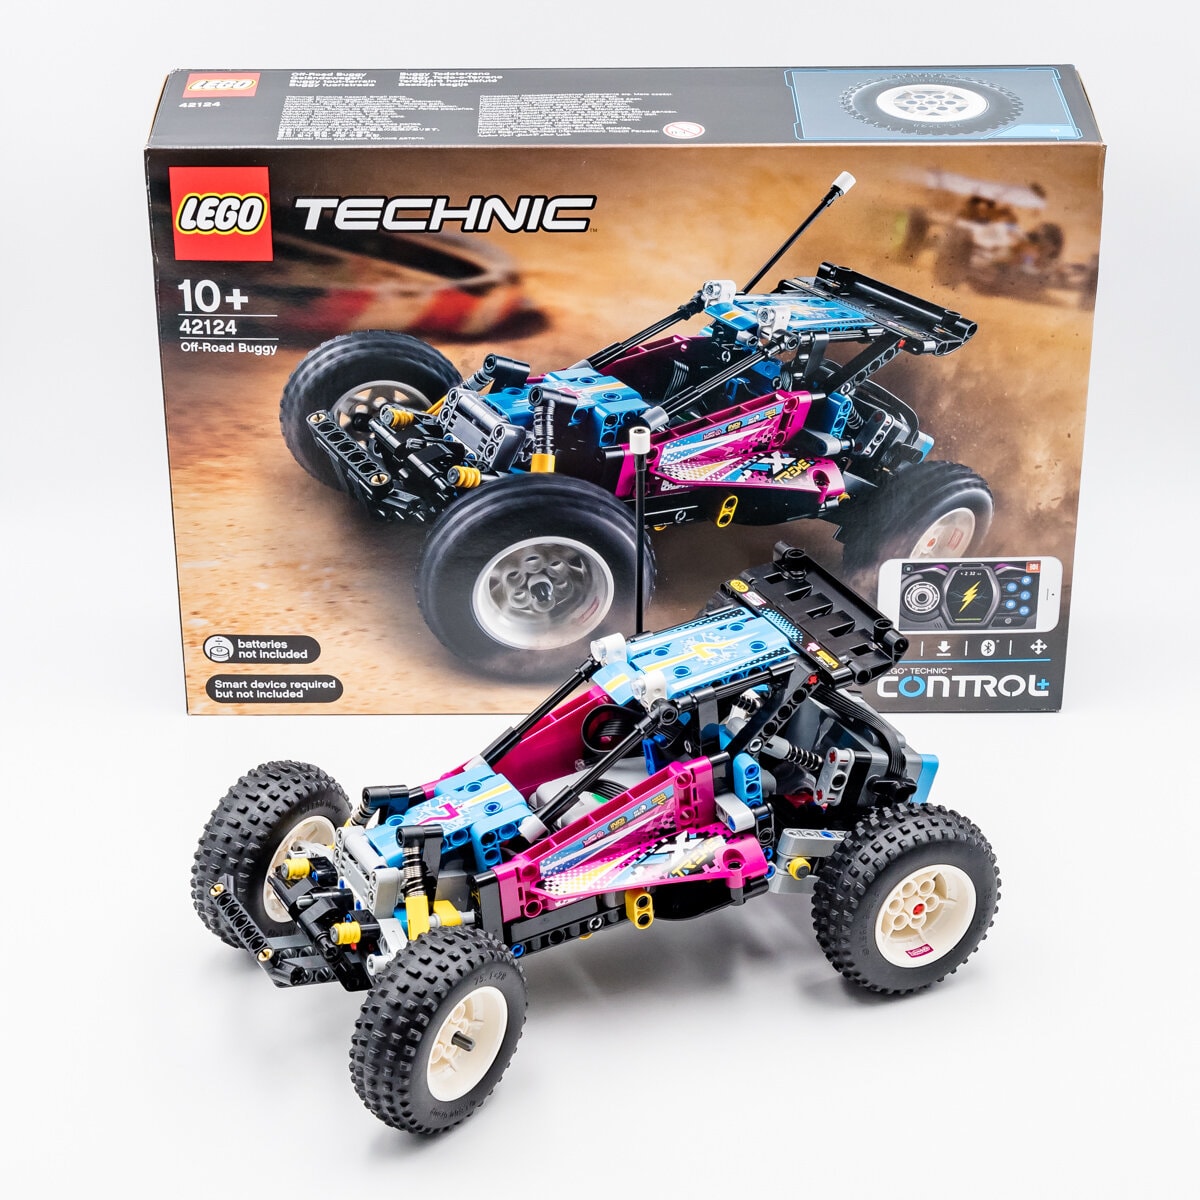 REVIEW LEGO Technic 42124 Off-Road Buggy - HelloBricks